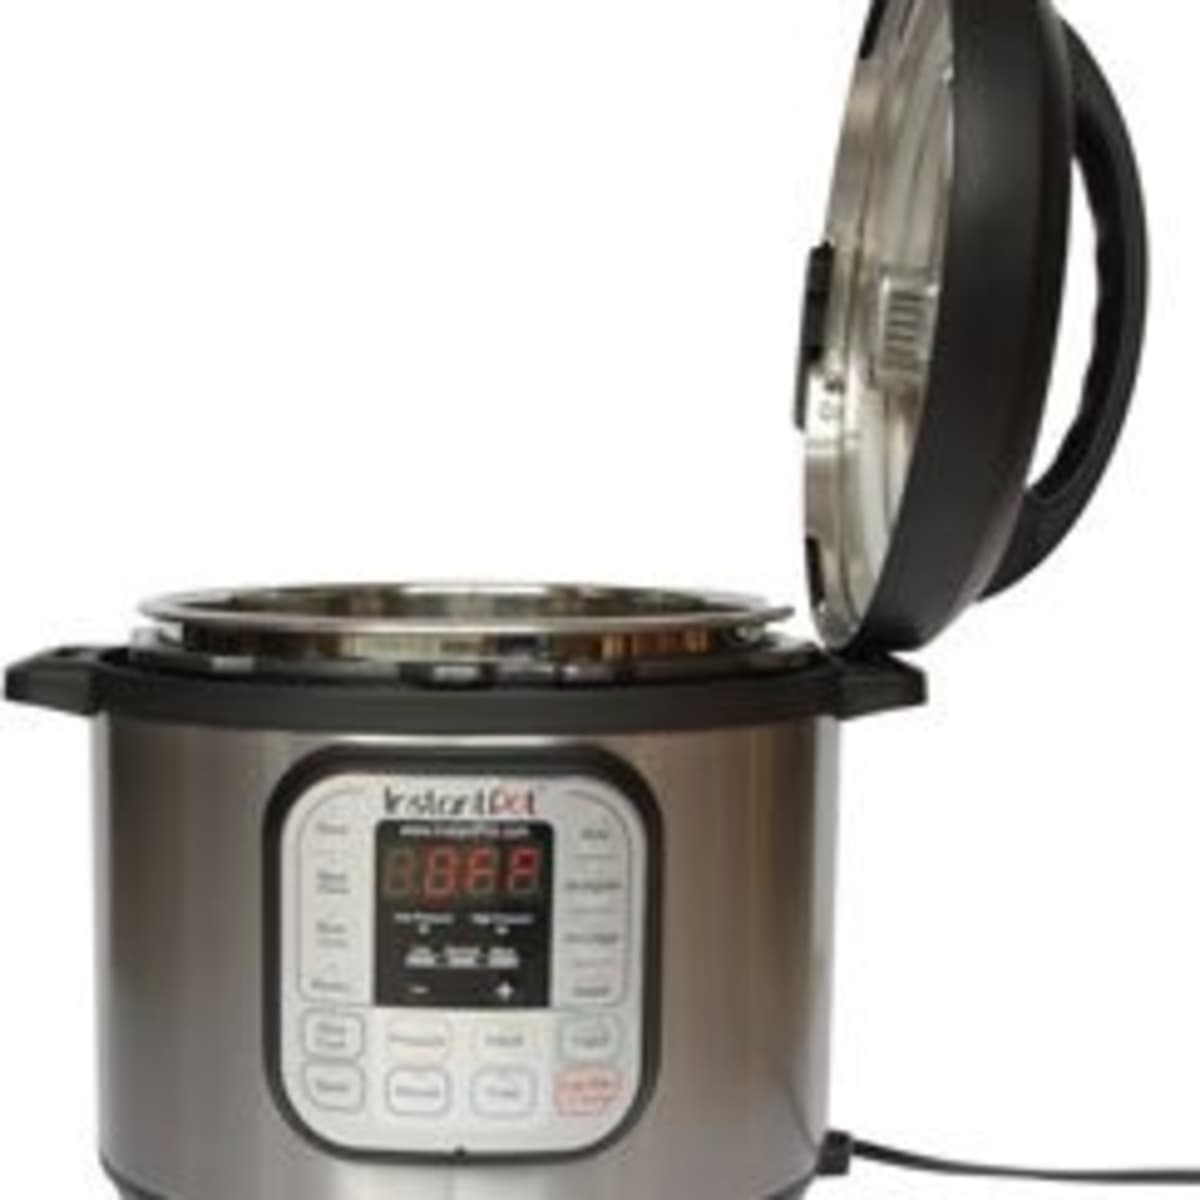 Instant Pot Duo 8-Quart 7-in-1 Electric Pressure Cooker, Stainless Steel  NEW